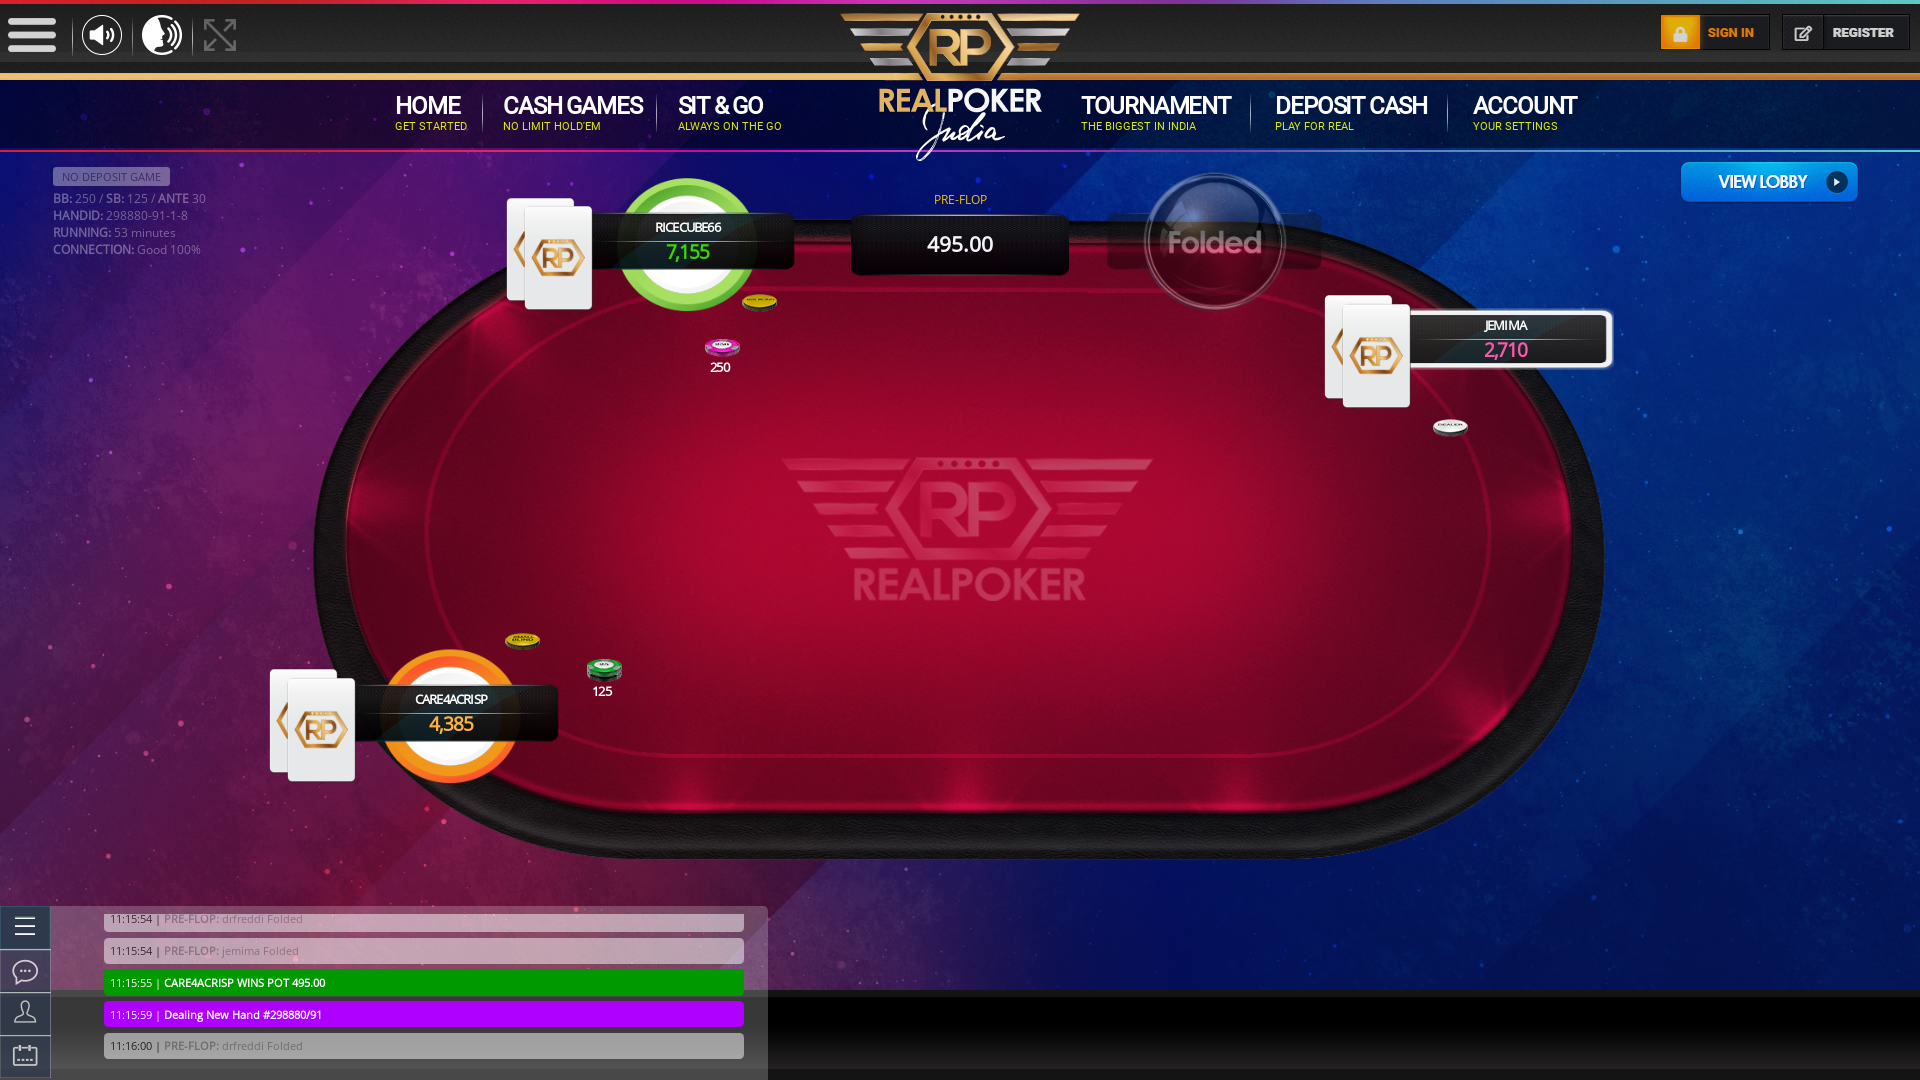 Online poker on a 10 player table in the 52nd minute match up